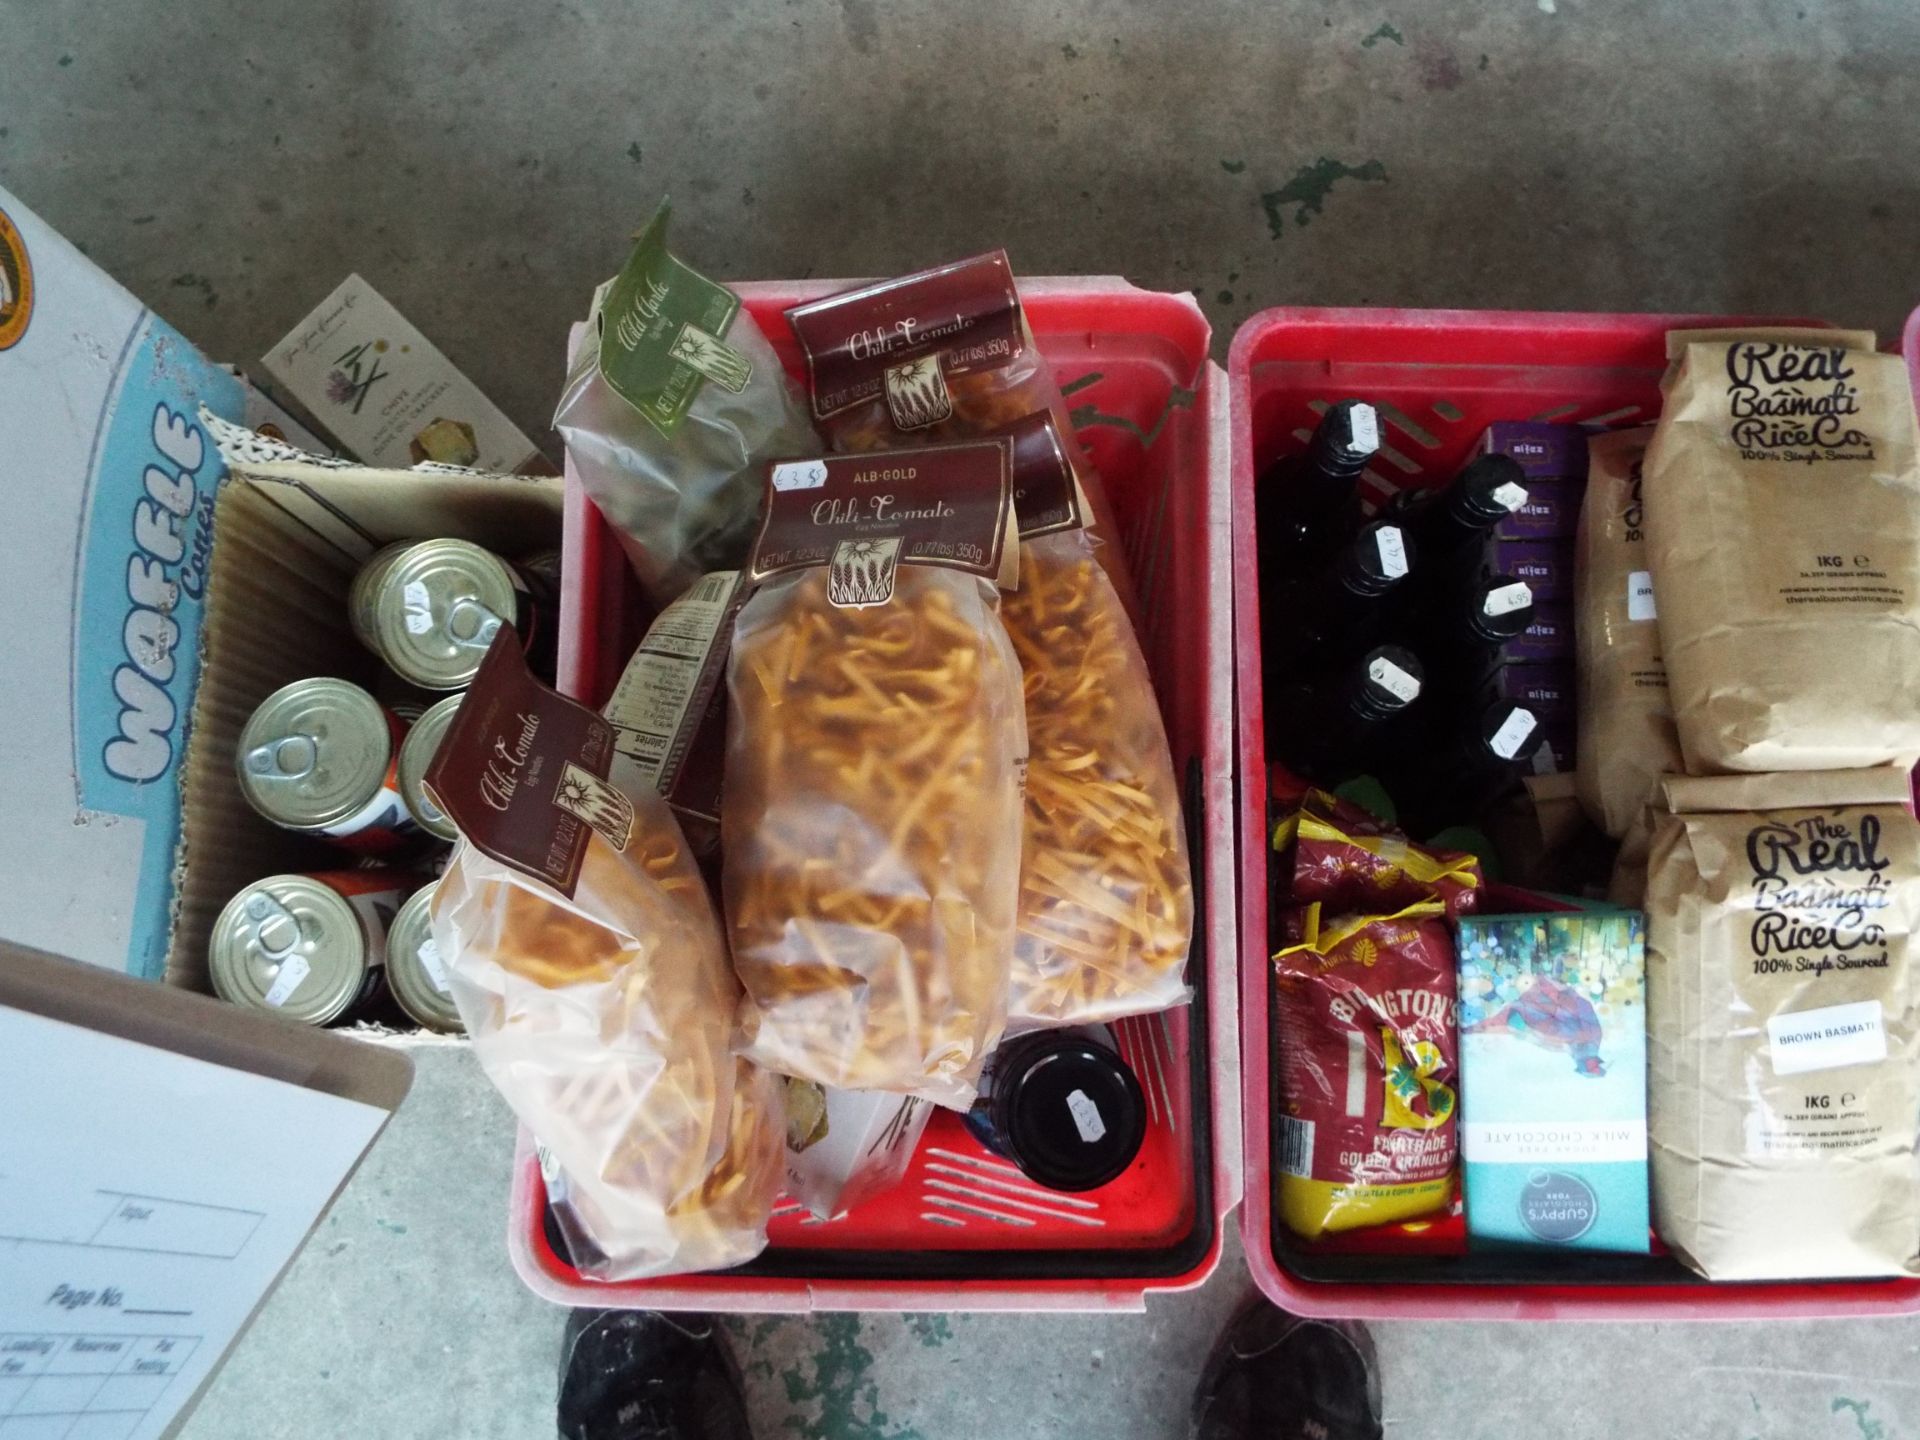 Large Quantity of Food Stuffs to Include Pickles, Spices, Sauces, Pastas and Herbs etc. - Image 3 of 4